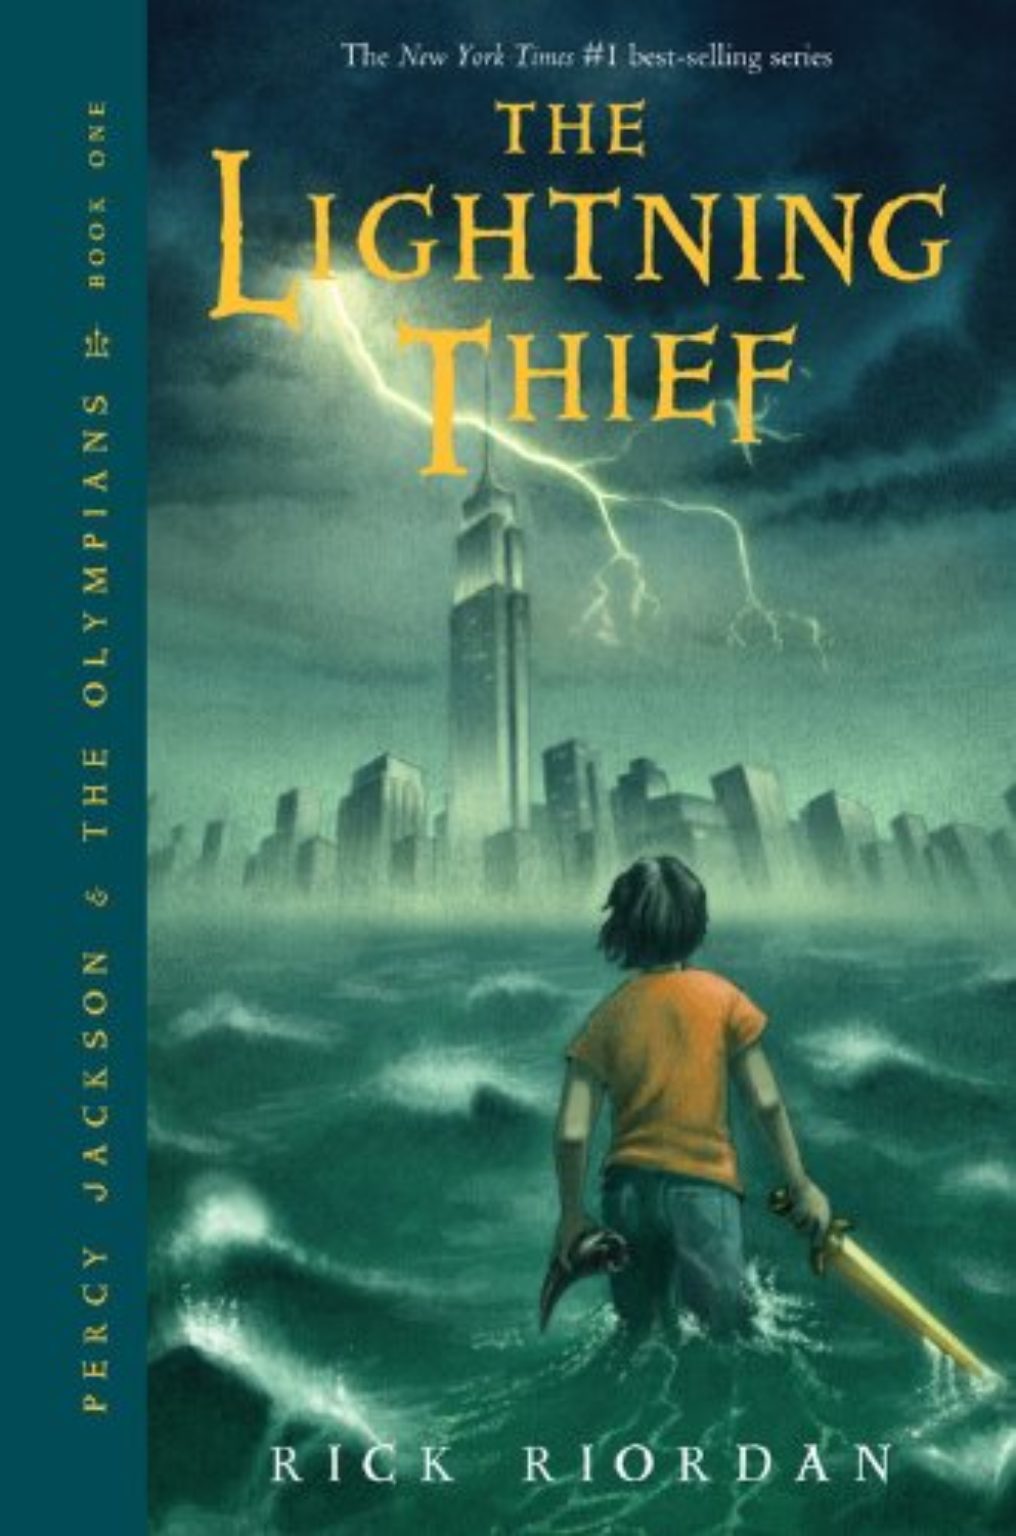 a book review on percy jackson